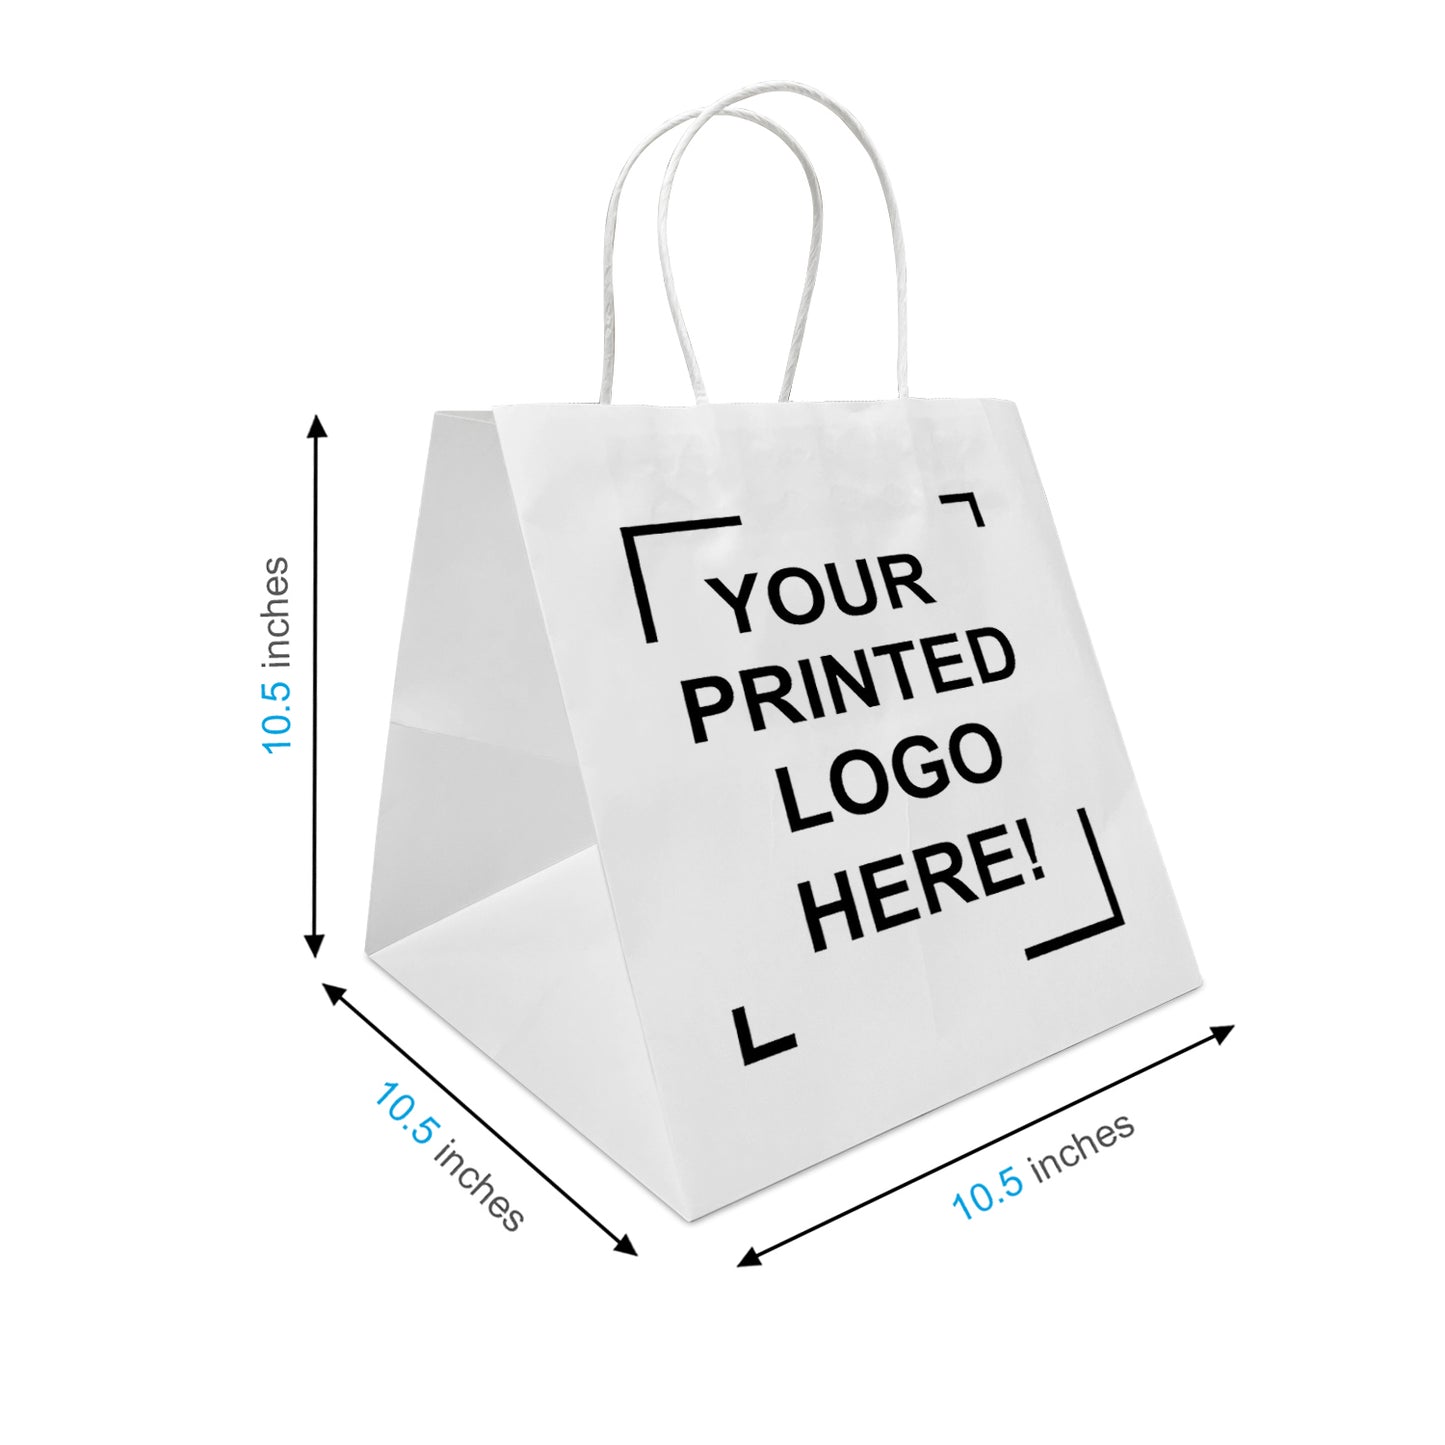 250 Pcs, Cube, 10.5x10.5x10.5 inches, White Paper Bags, with Twisted Handle, Full Color Custom Print